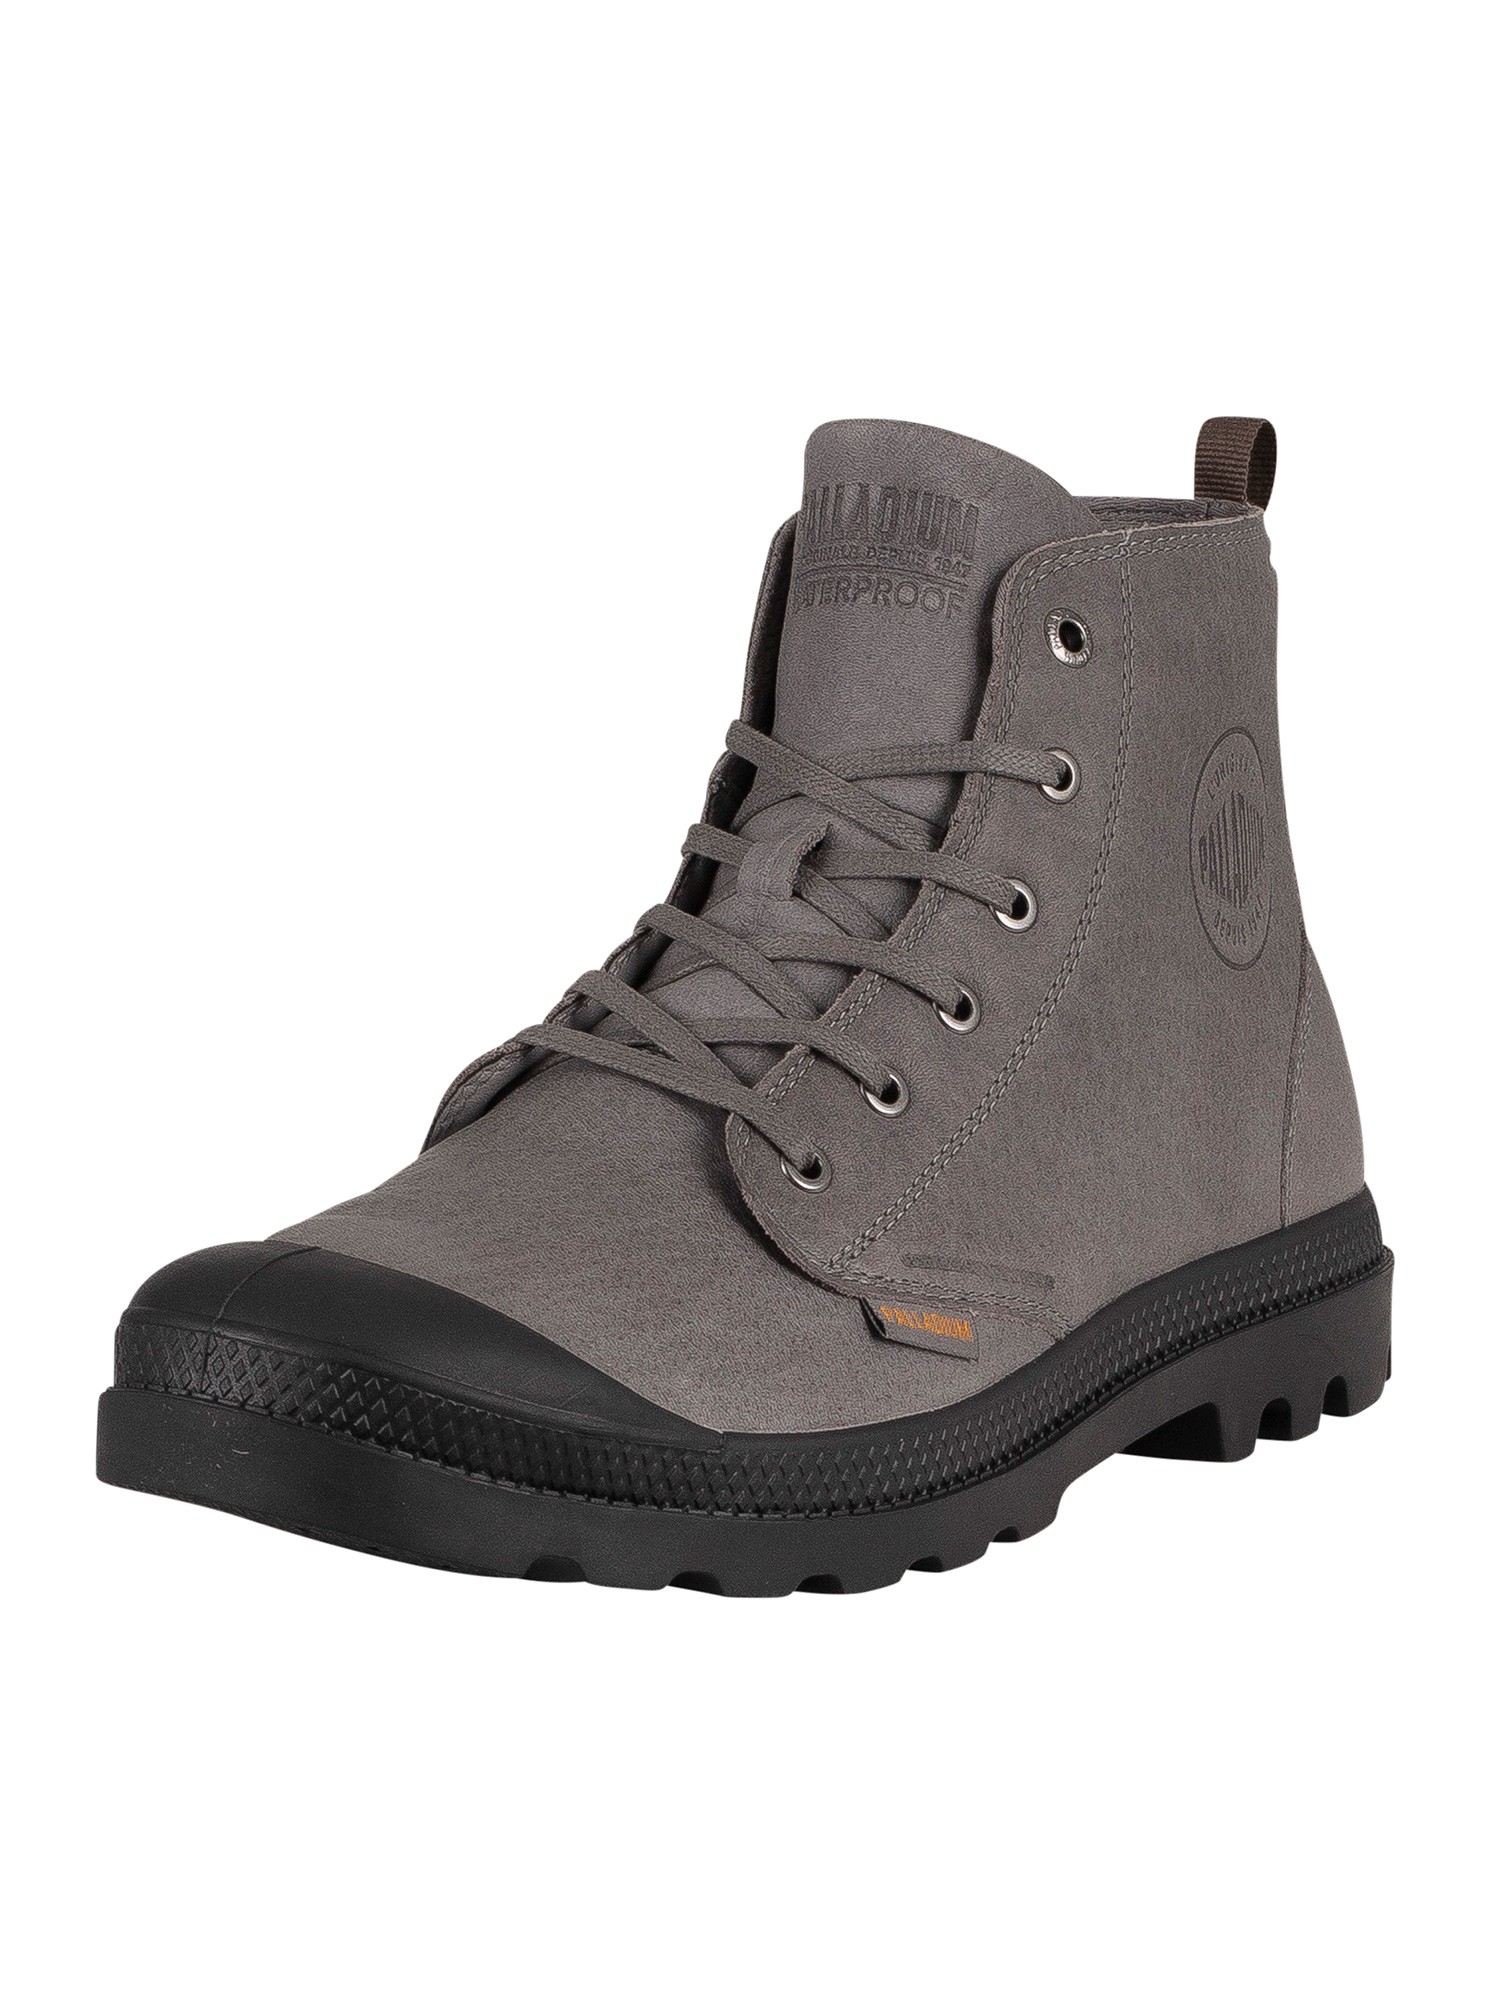 Pampa Waterproof Hi Essential Leather Boots